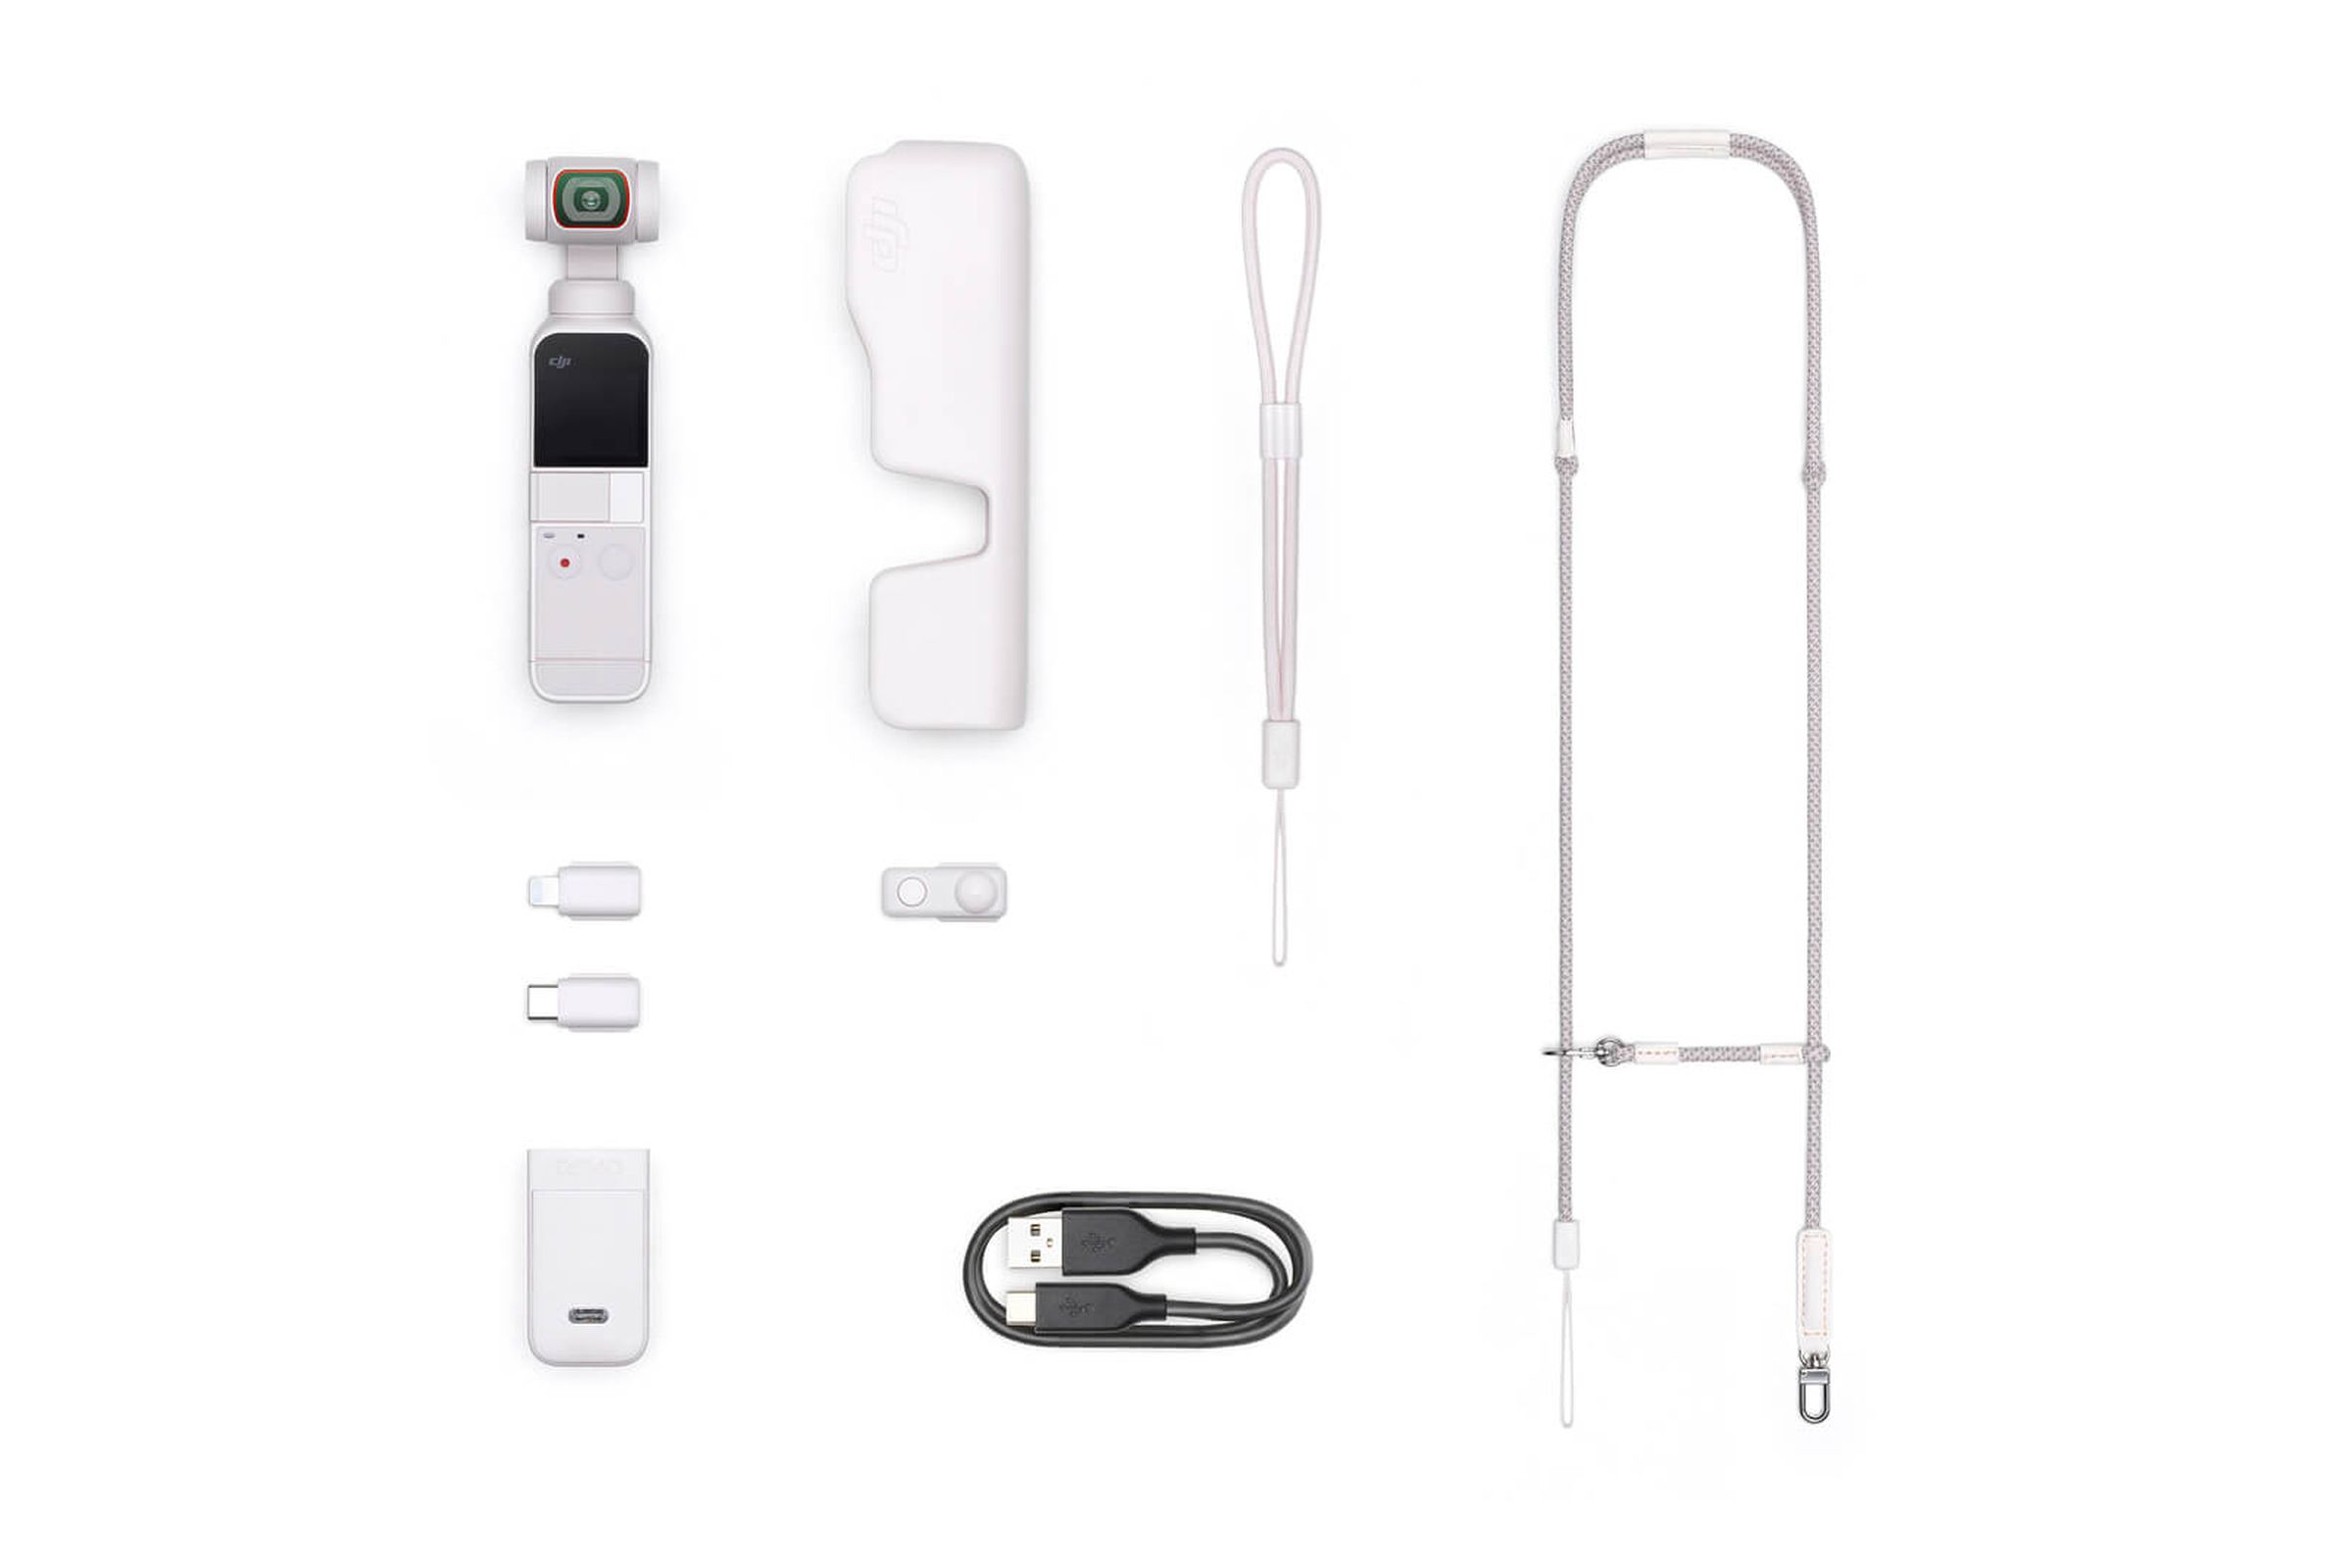 Accompanying accessories are also available in white.